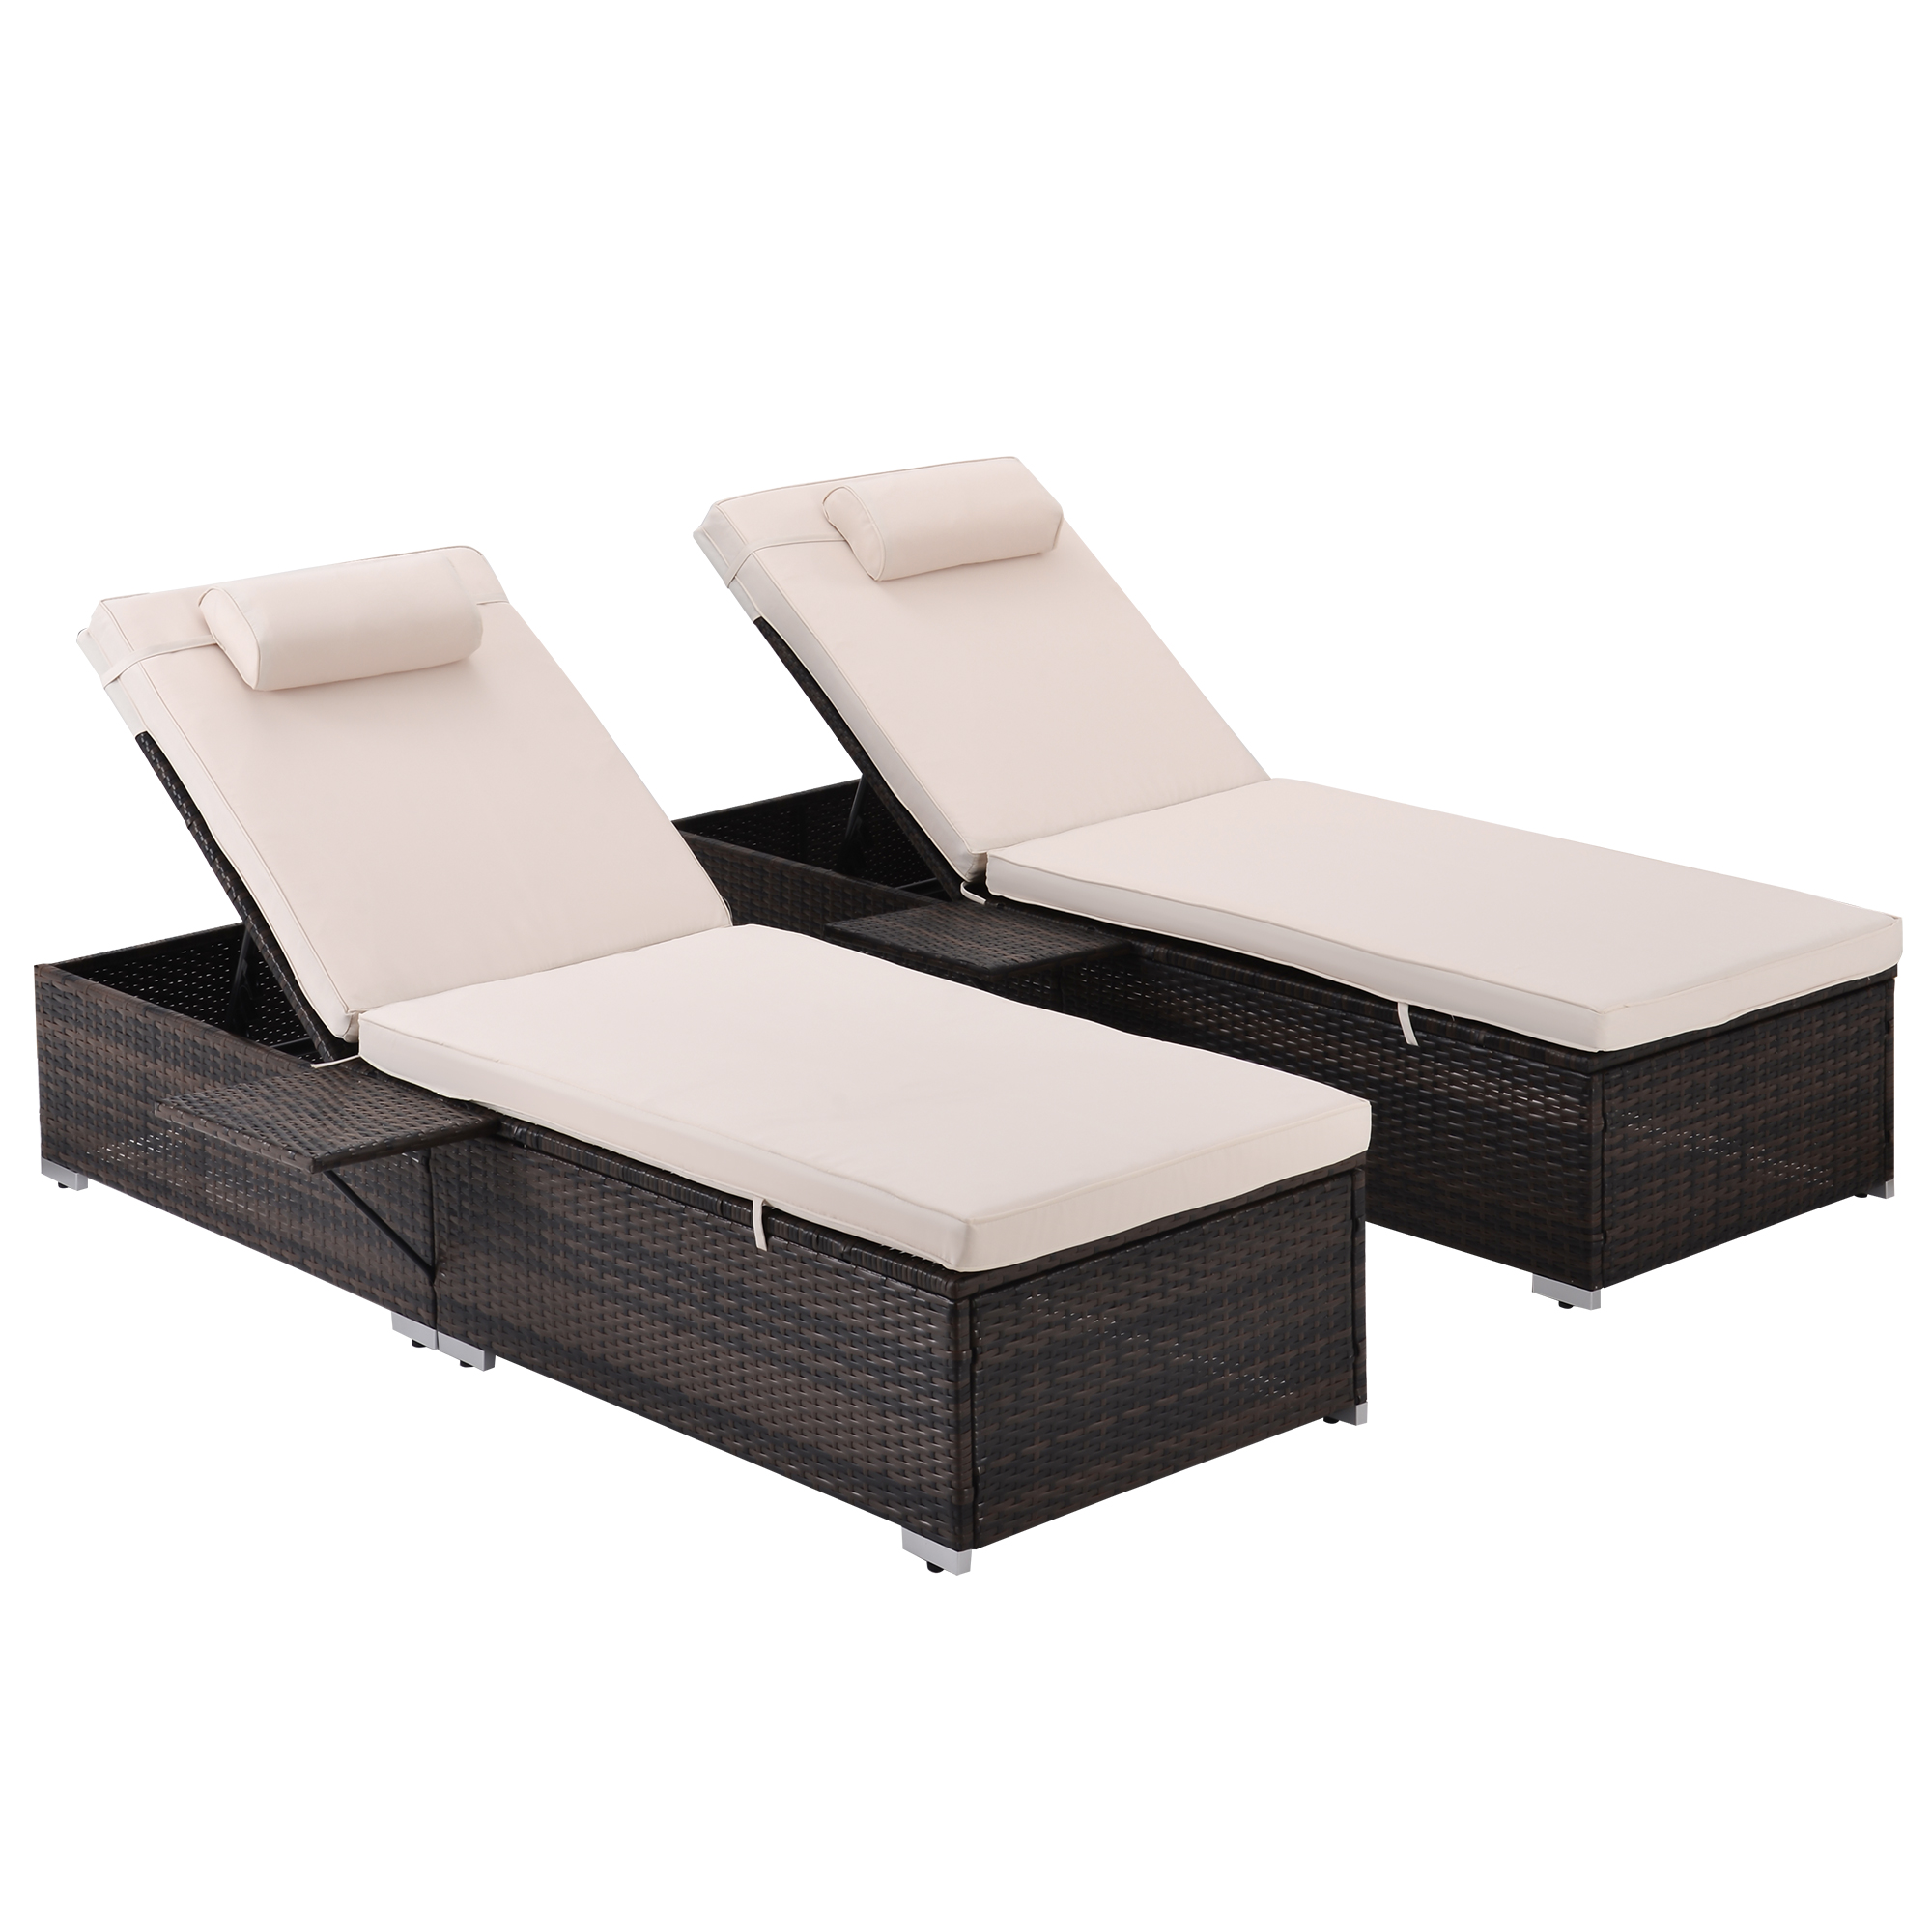 Clearance! Patio Chaise Lounge Chairs, 2 Piece Outdoor Wicker Adjustable Backrest Recliners with Seat Cushion, Side Table&Head Pillow, Modern Rattan Reclining Chair Set for Balcony Pool Deck, J2469 - image 1 of 15